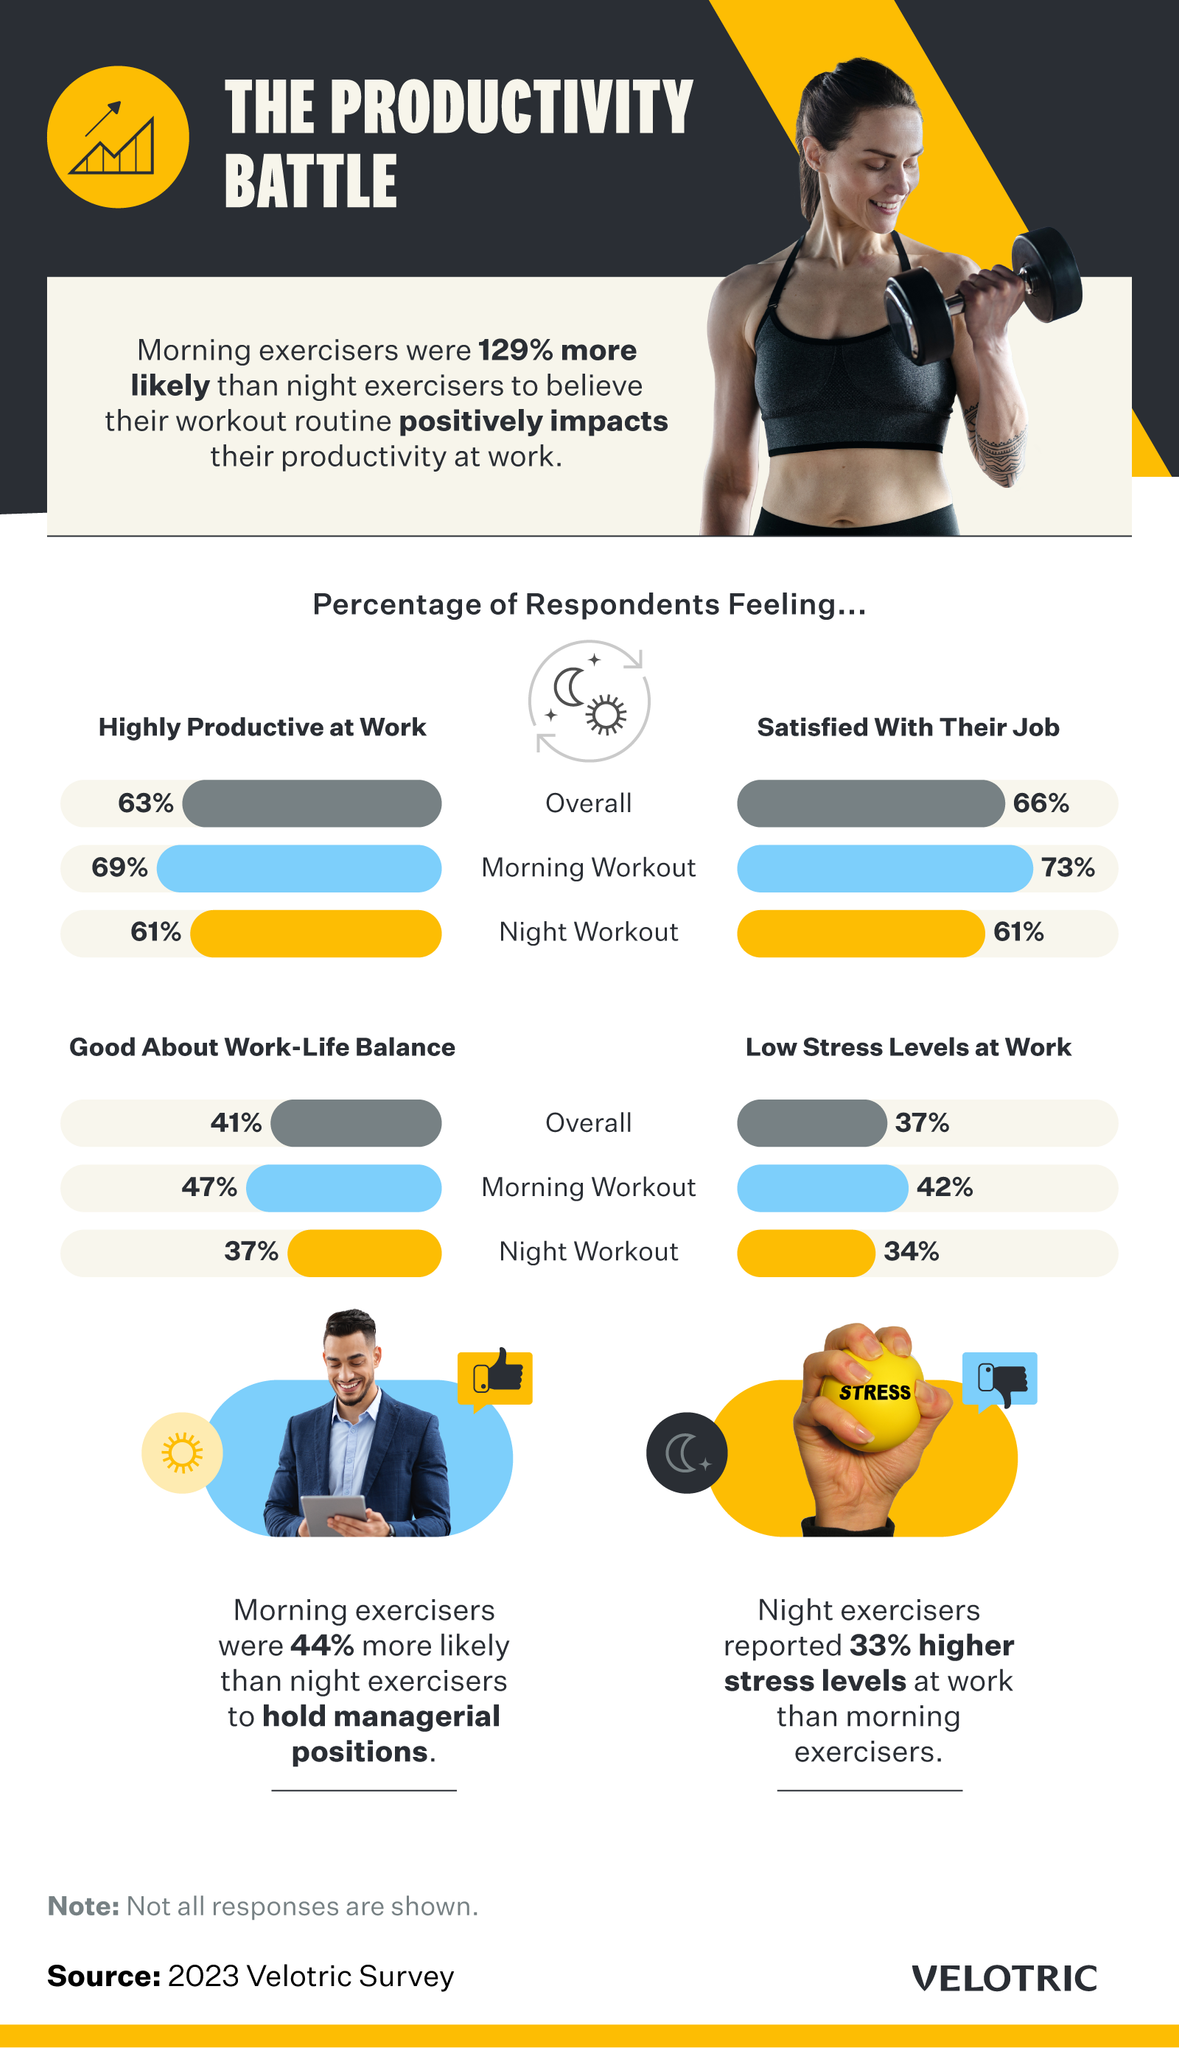 Productivity at work and job satisfaction